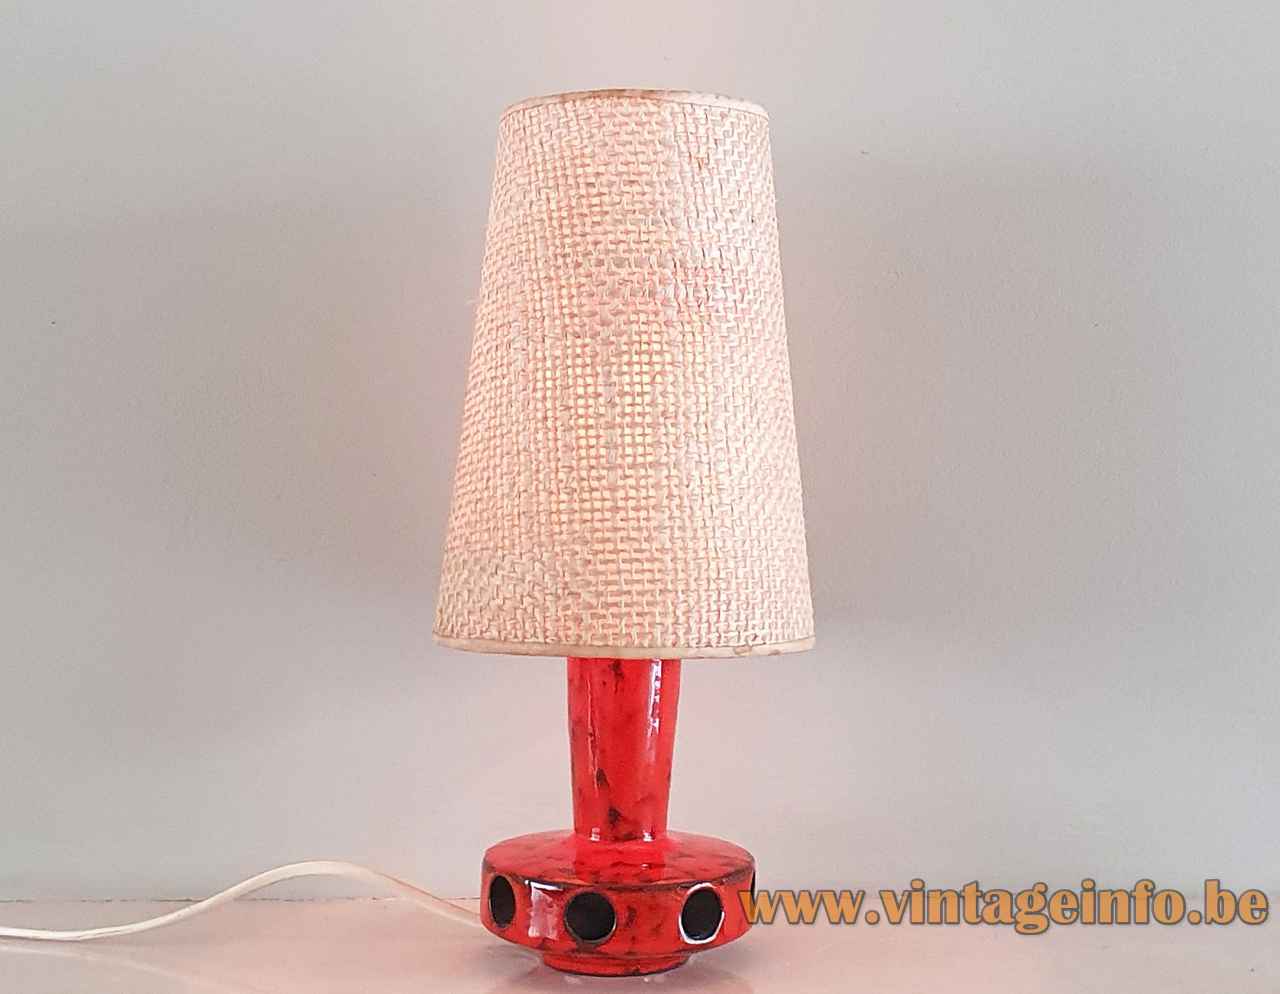 German red ceramics table lamp round base holes conical fabric lampshade 1960s 1970s Germany Gerhards style